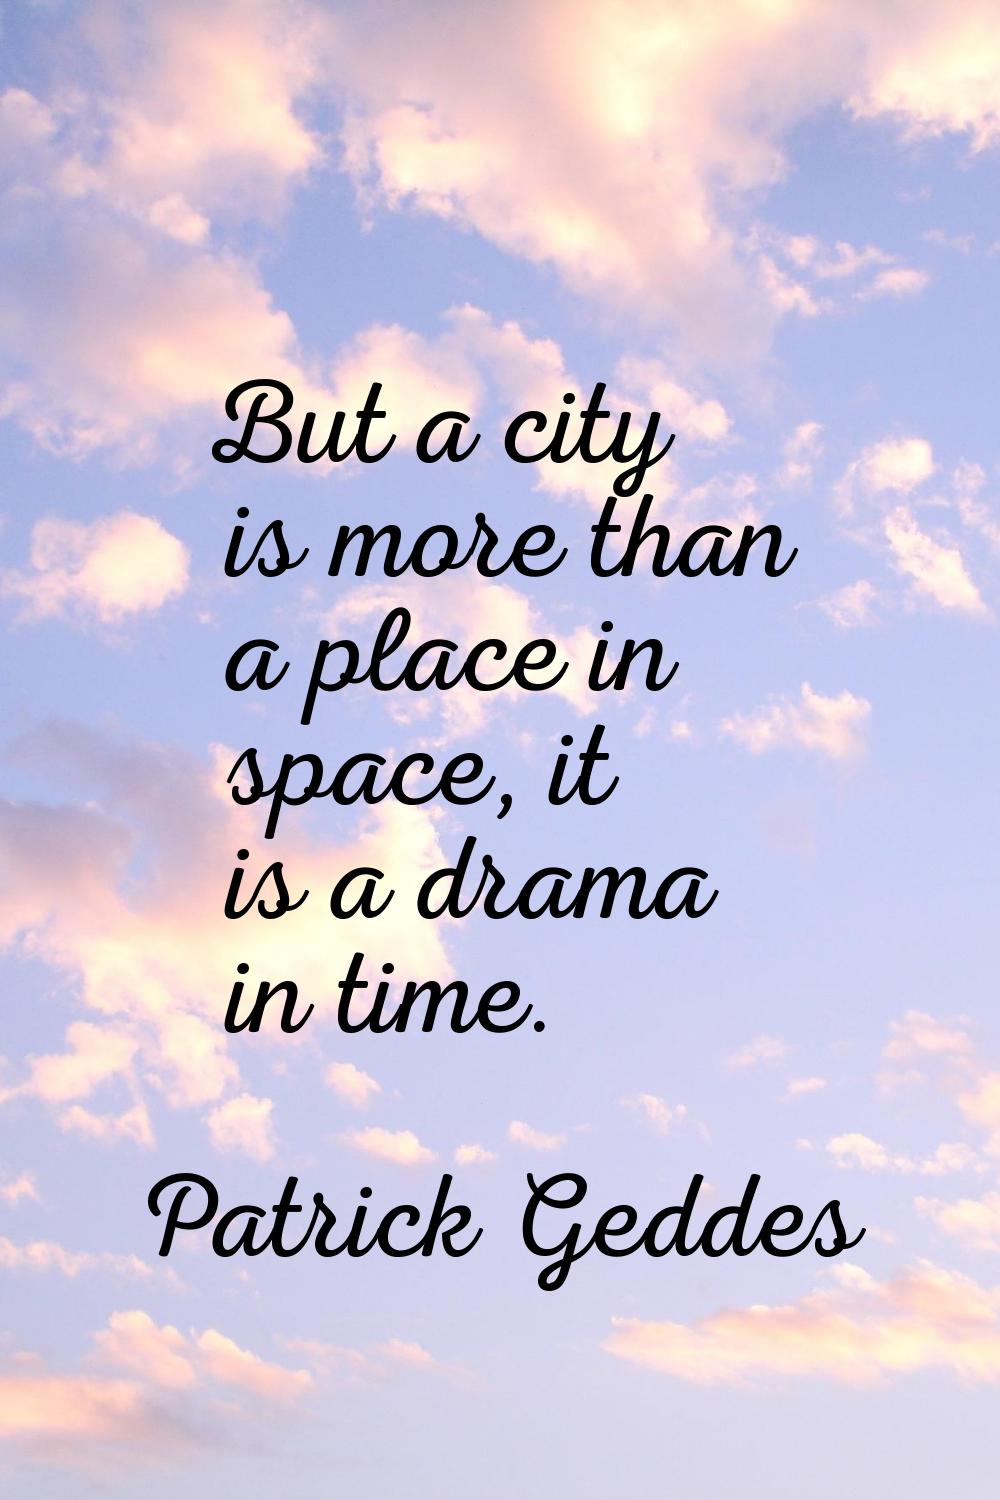 But a city is more than a place in space, it is a drama in time.